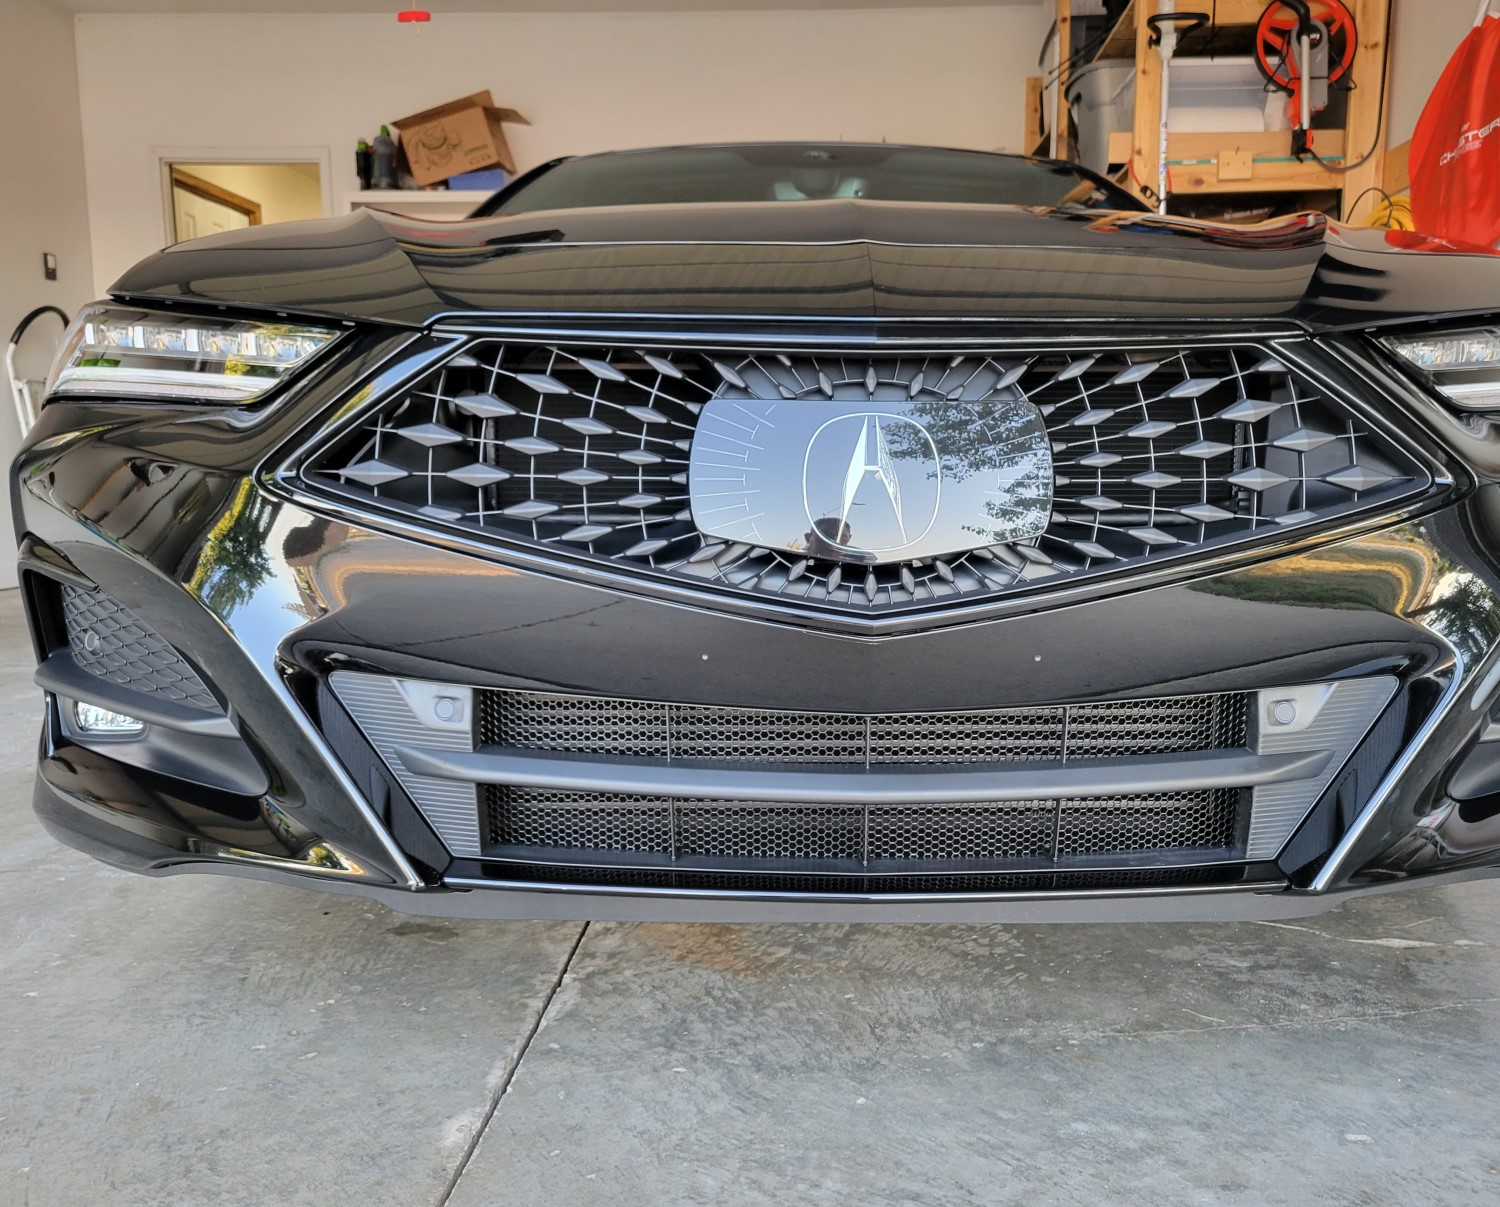 New Grille Mesh for 2021+ Acura TLX Lower Radiator - Protect Your Car and Avoid Costly Repairs